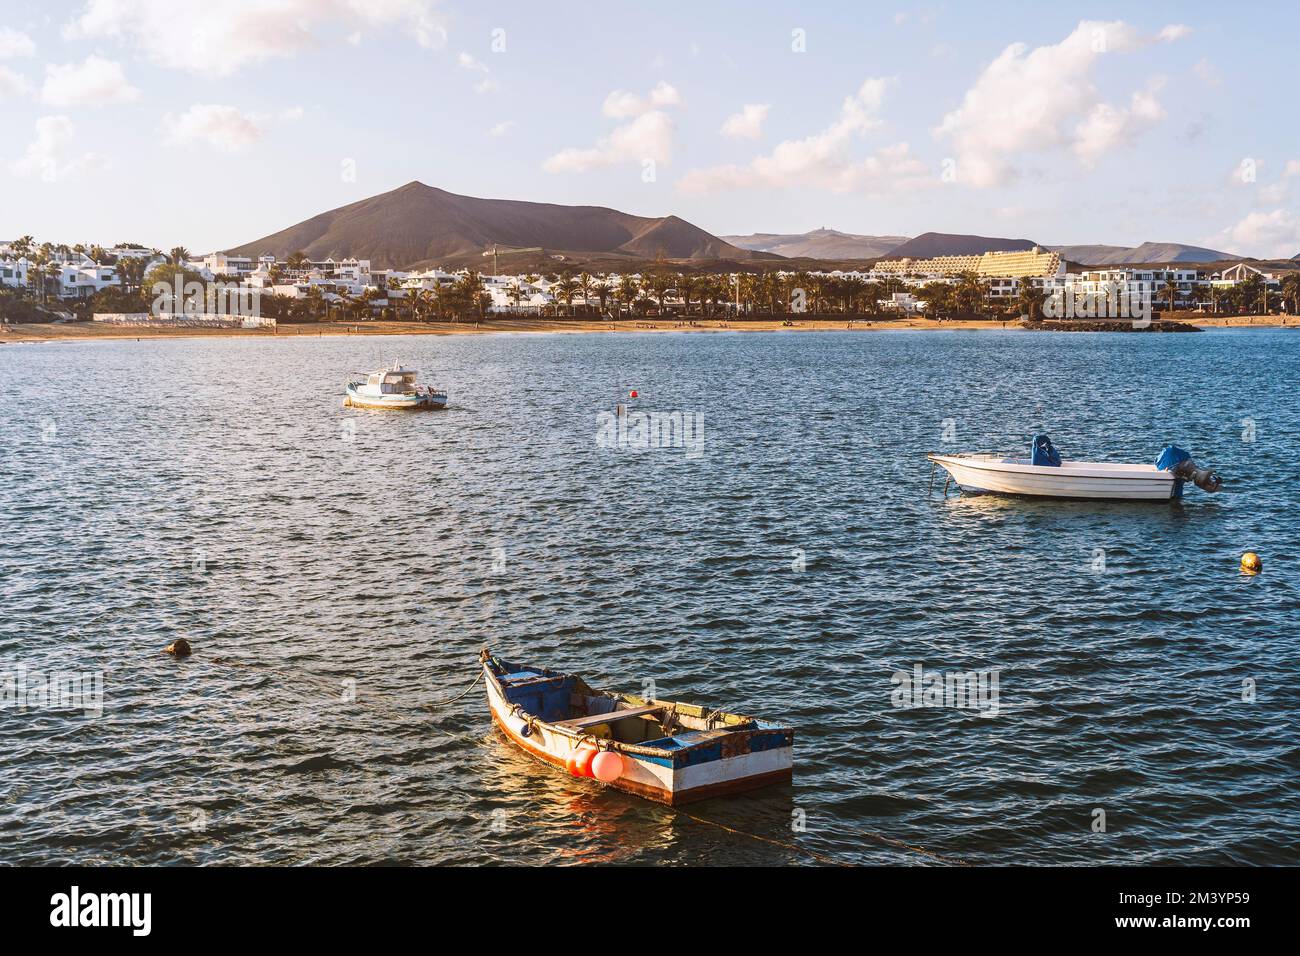 View of the resort town named Costa Teguise with boats on the foreground, Lanzarote, Canary Island, Spain Stock Photo